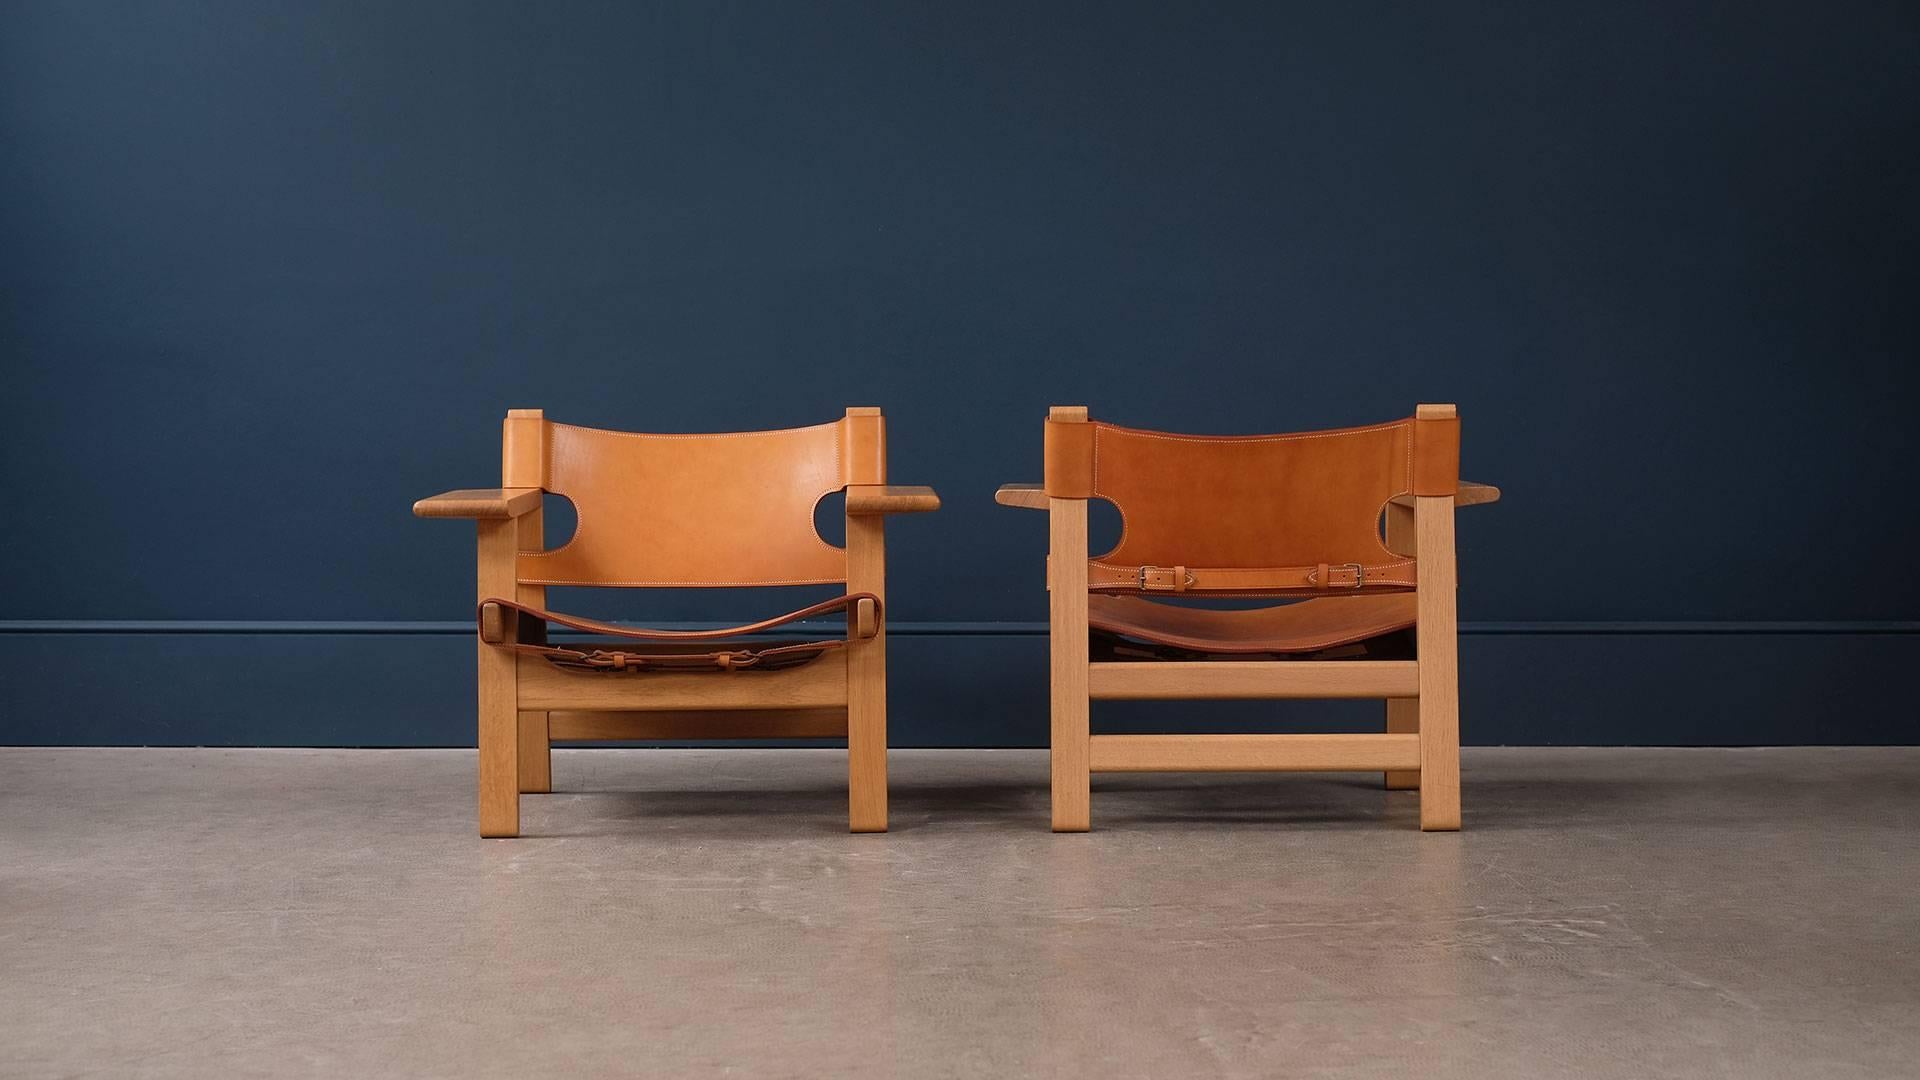 Beautiful pair of Spanish chairs designed by Borge Mogensen for Fredericia, Denmark. Wonderful solid oak frames and patinated saddle leather seats. Amazing chairs.